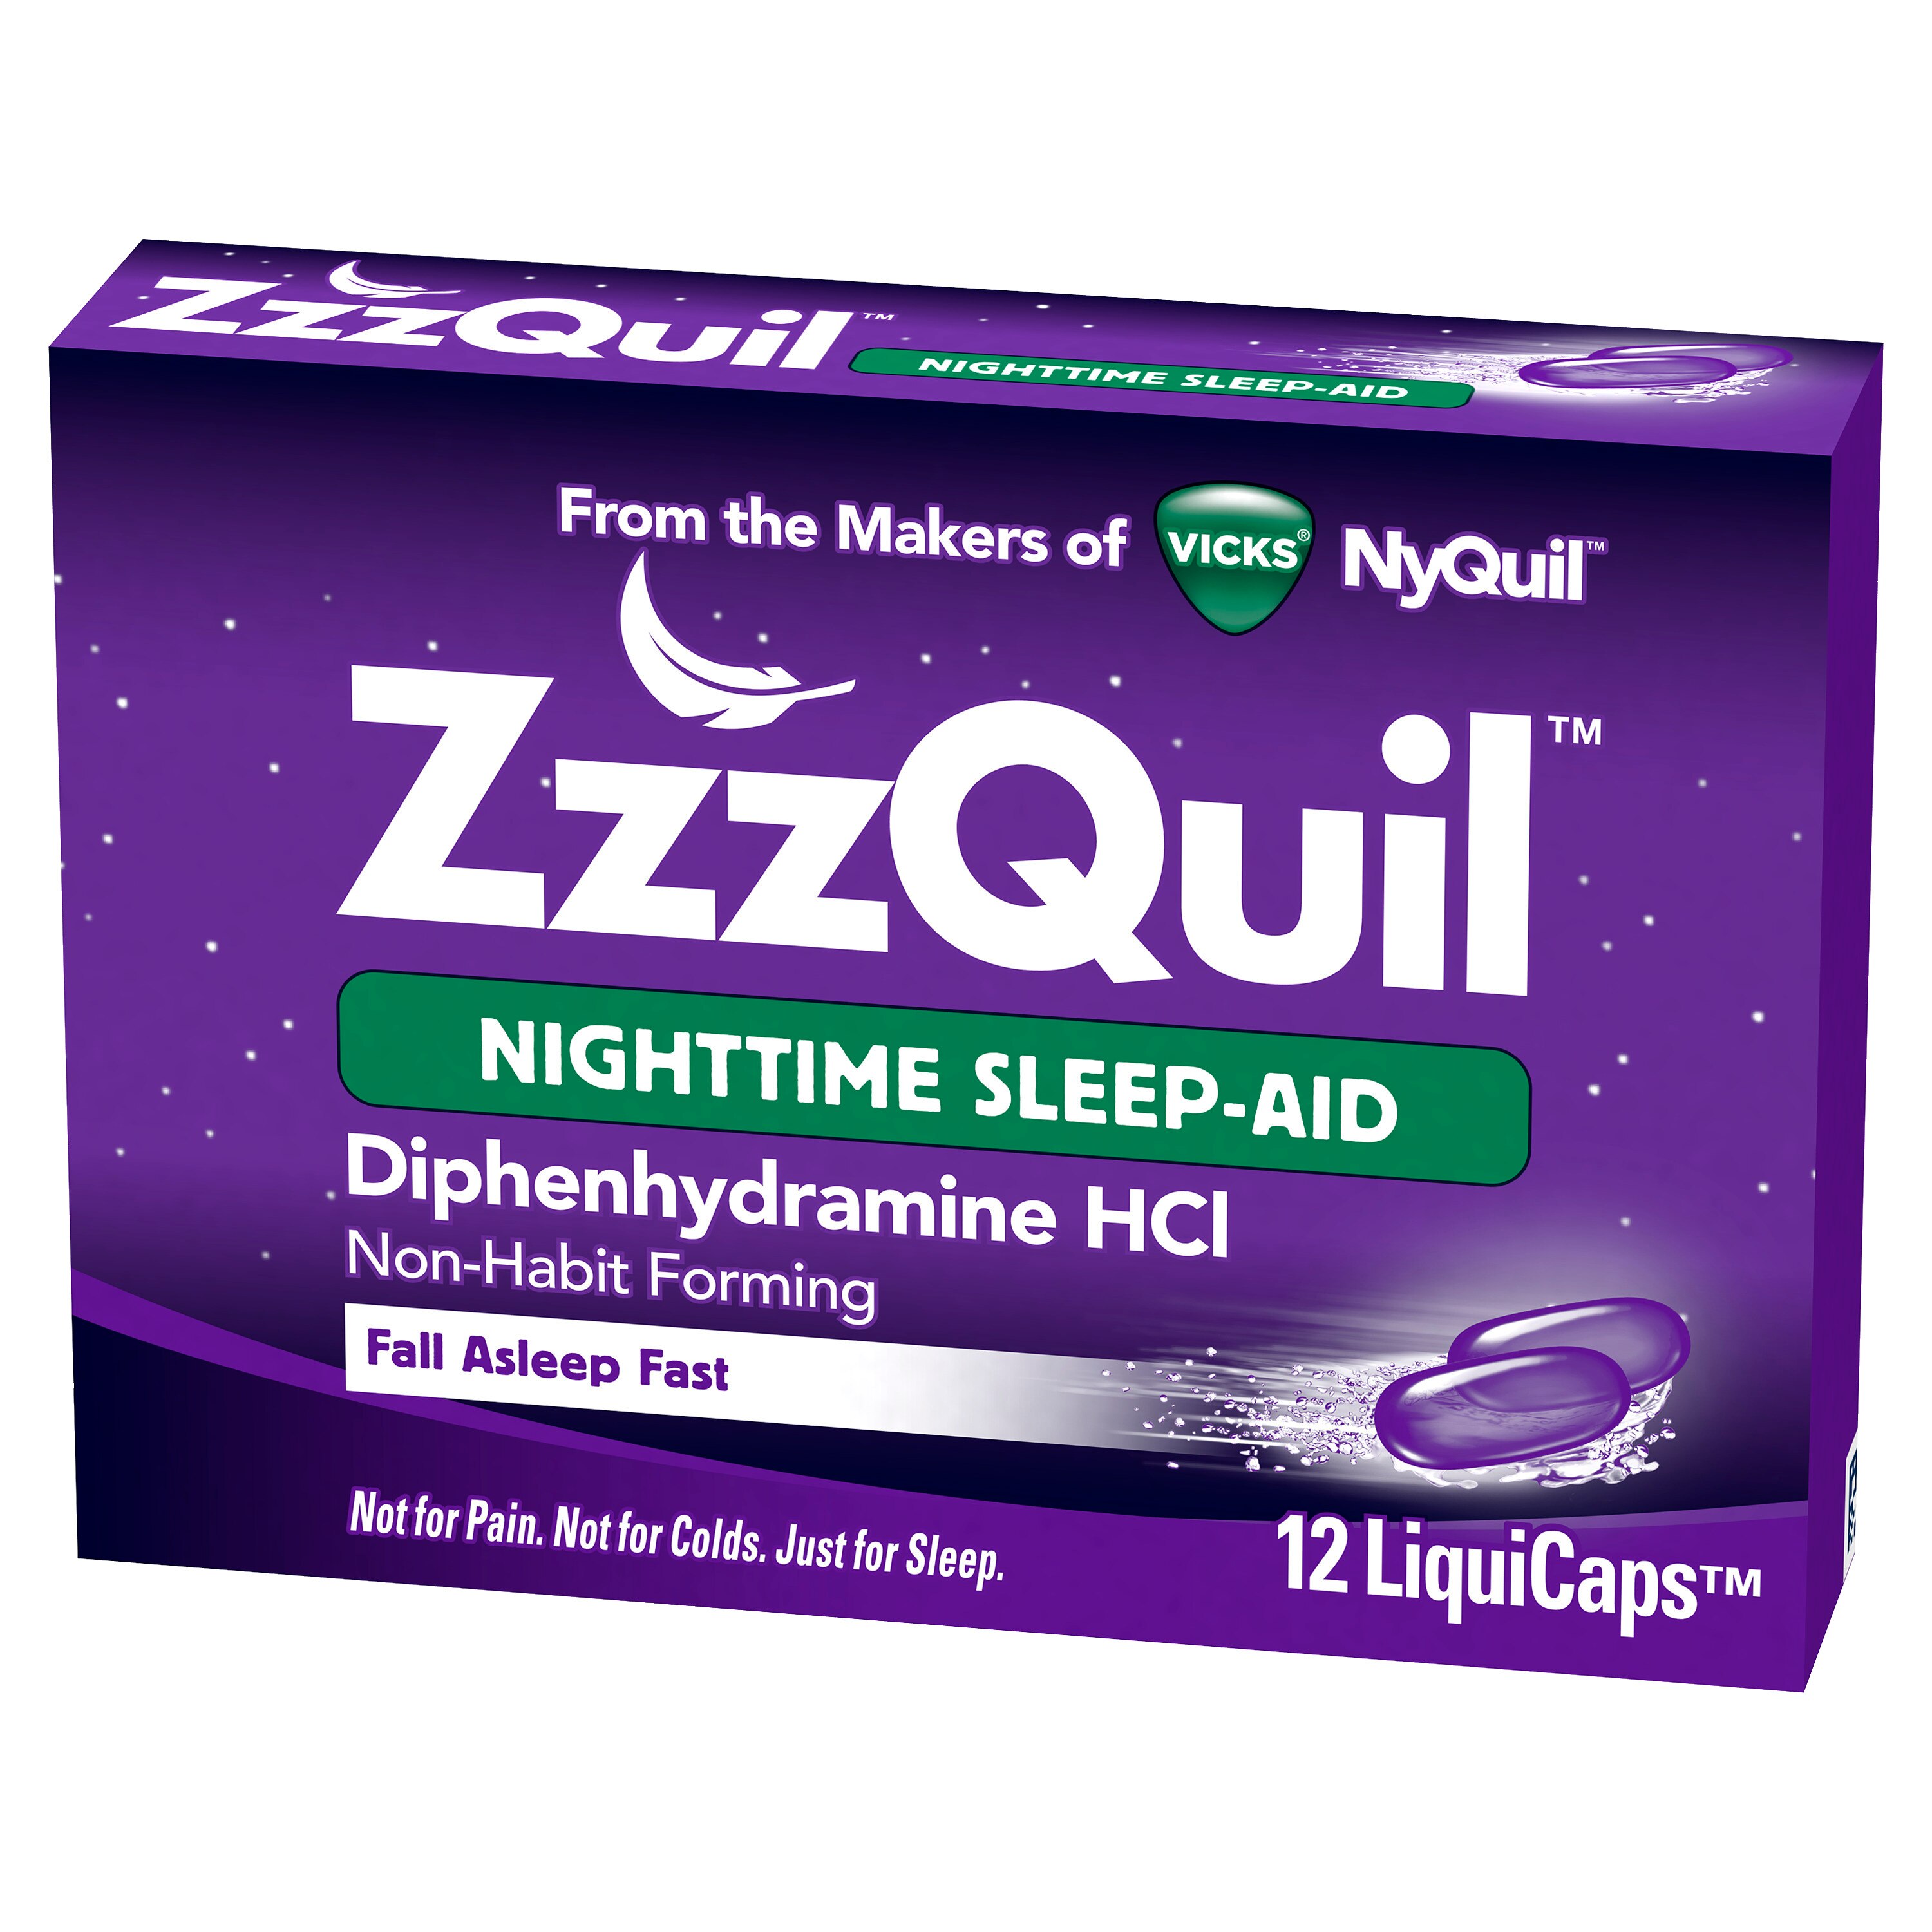 Can You Take Zzzquil While Pregnant Zzzquil Nighttime Sleep Aid Liquicaps Free Shipping At Cvs Pharmacy